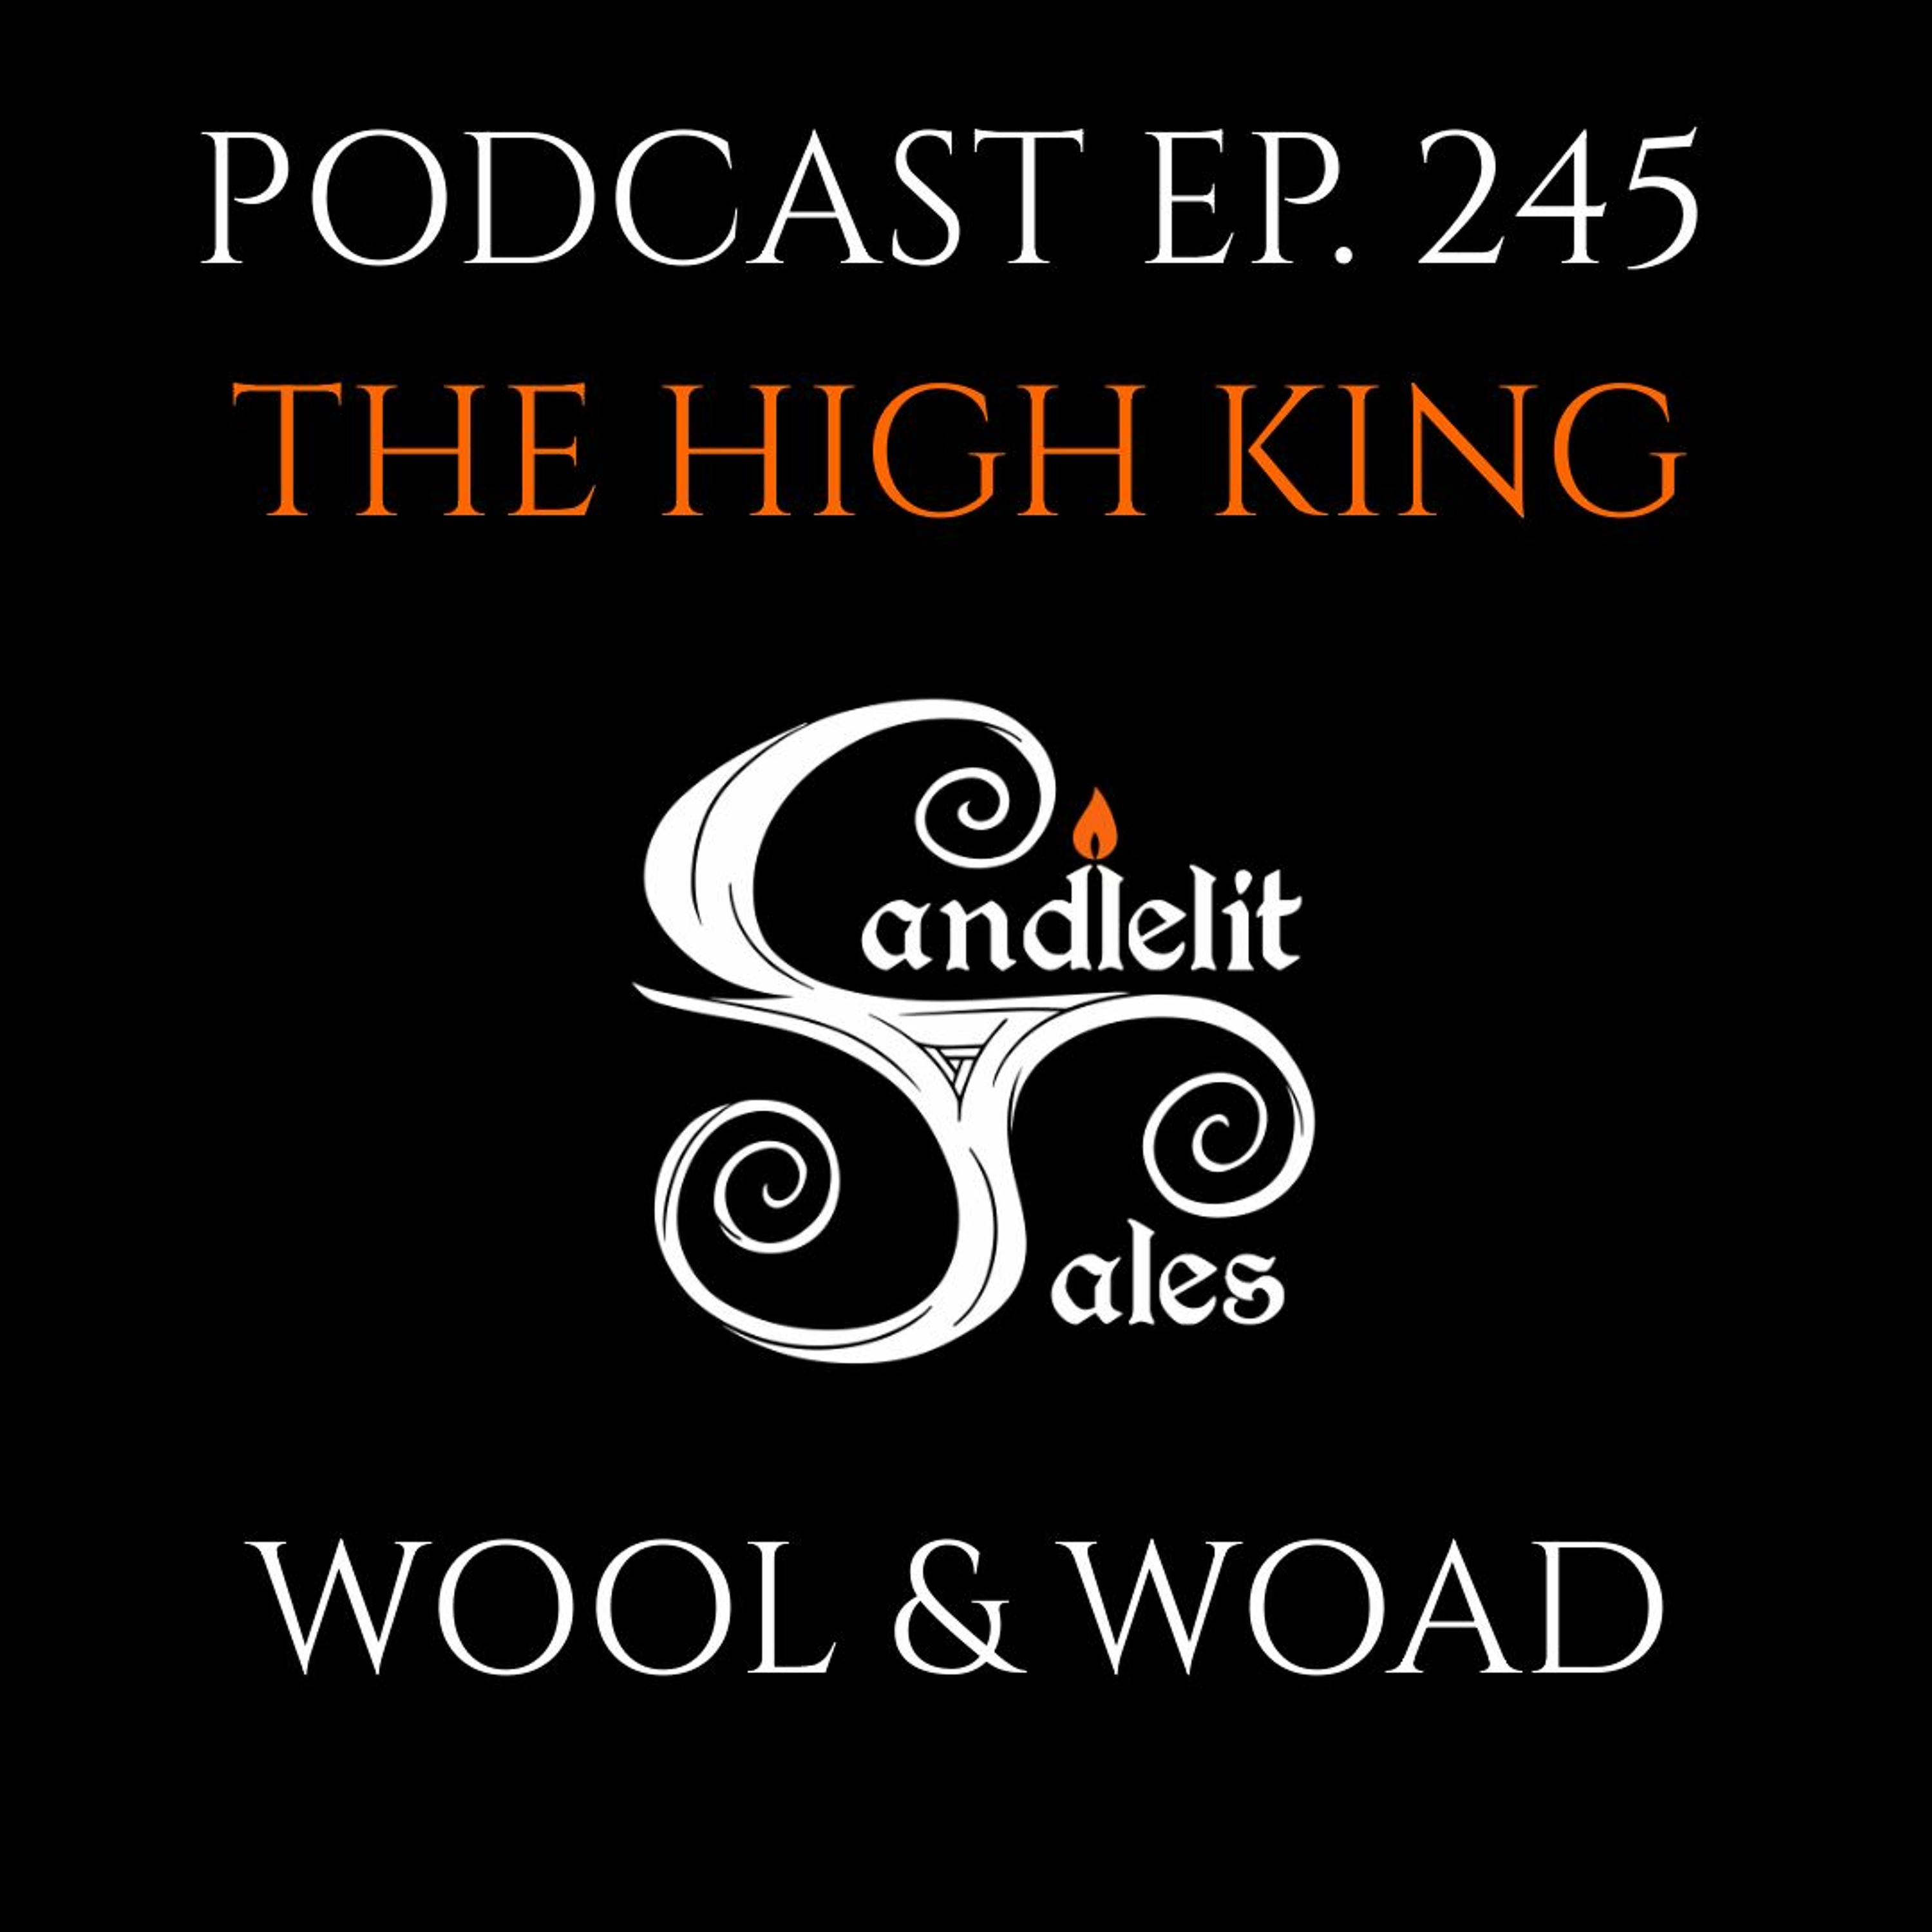 Episode 245 - The High King - Wool & Woad